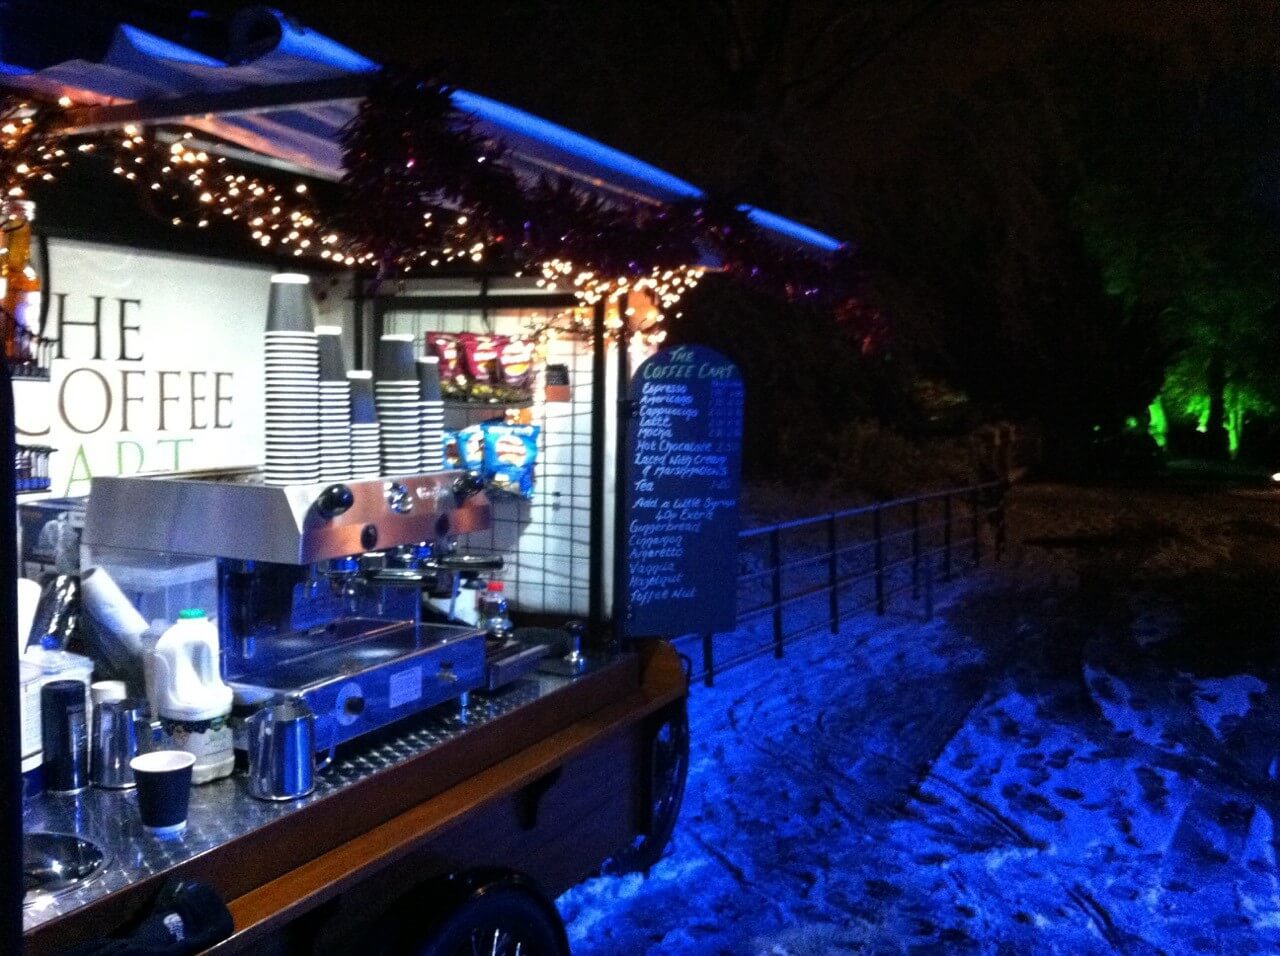 the coffee cart at night